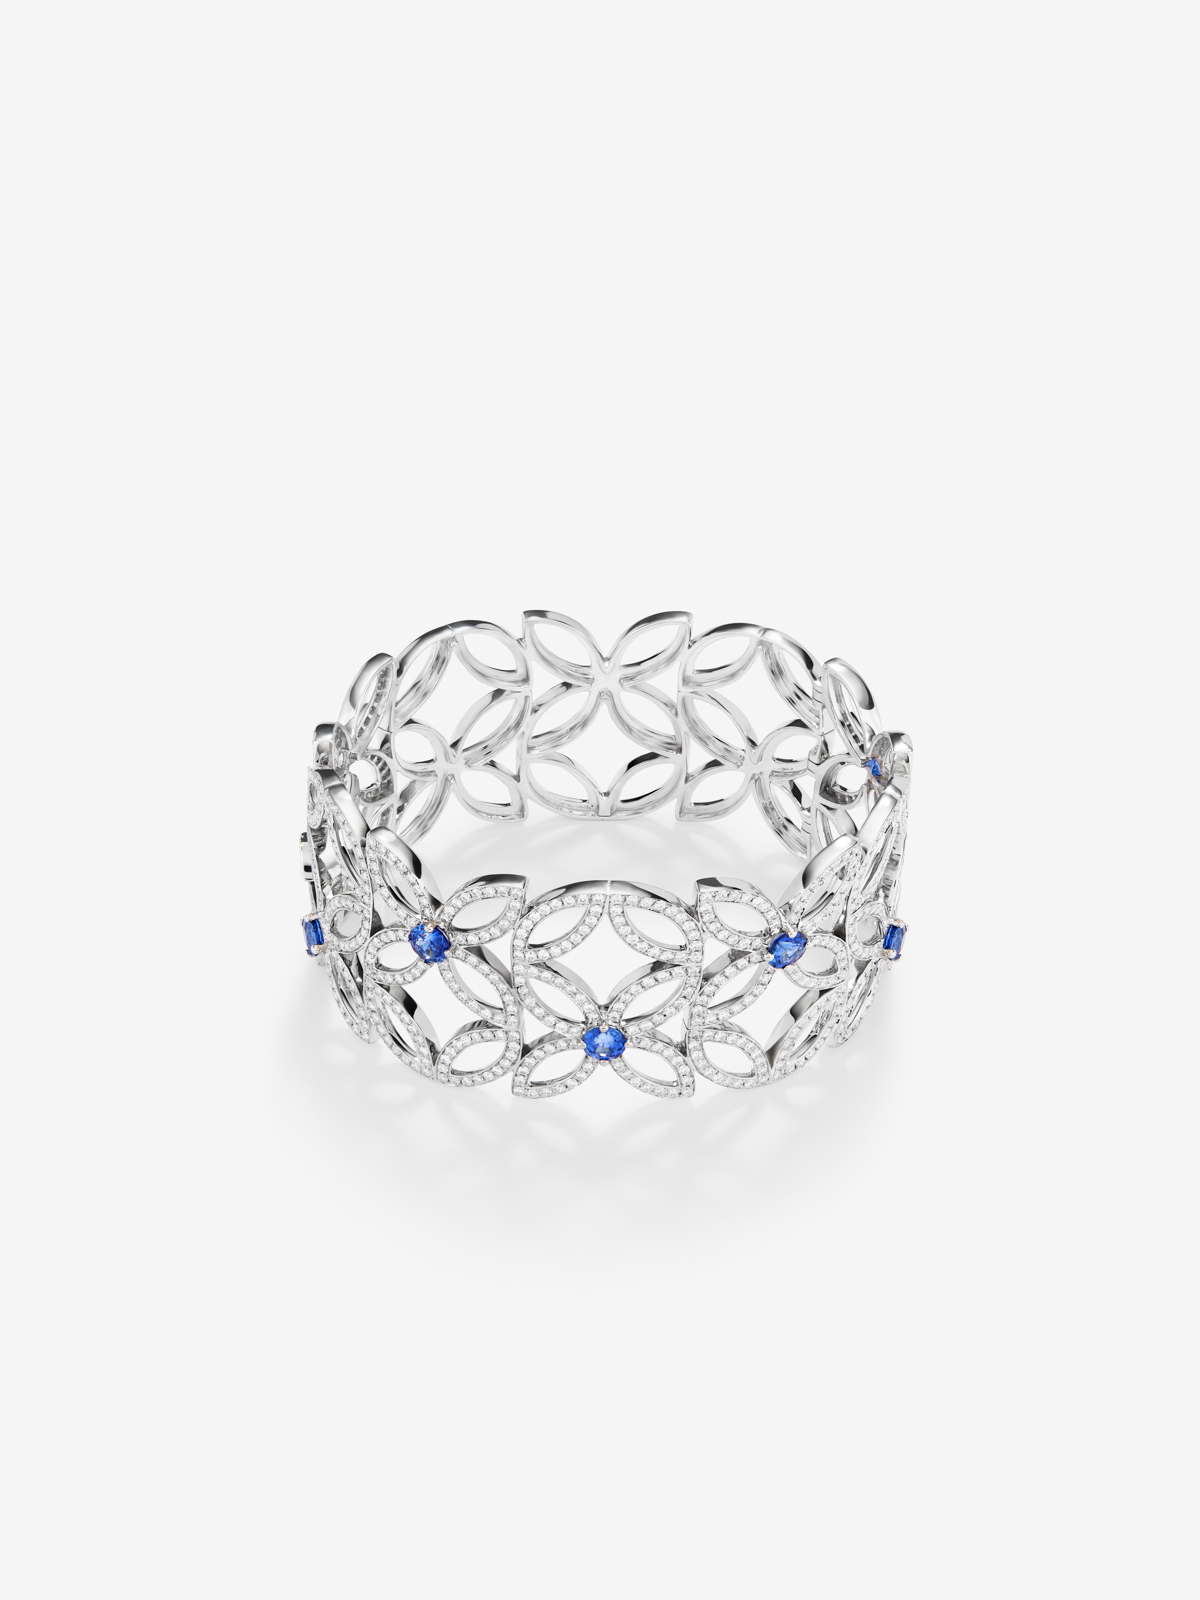 18K white gold bracelet with blue sapphiros in bright size of 3.5 cts and white diamonds in bright size of 5.12 cts